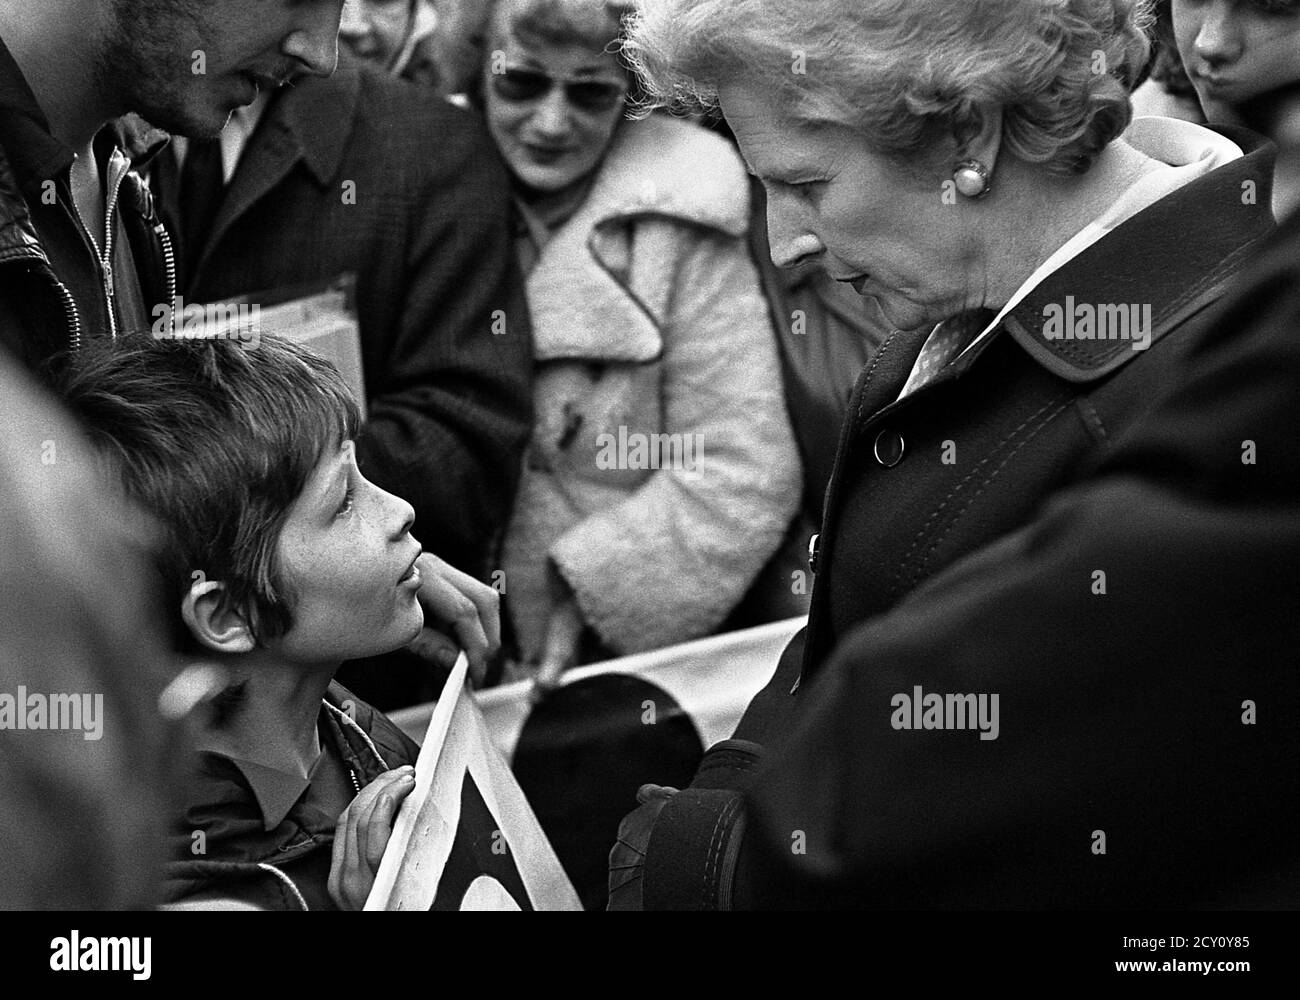 AJAXNETPHOTO.11TH FEBRUARY,1977. PORTSMOUTH, ENGLAND.  - CITY WALKABOUT - MRS MARGARET THATCHER (CON), LEADER OF THE OPPOSITION, CHATS WITH 11 YEAR OLD TONY VENN FOM PORTSEA WHILE MEETING THE PUBLIC IN COMMERCIAL ROAD SHOPPING PRECINCT DURING A CAMPAIGN WALKABOUT. PHOTO:JONATHAN EASTLAND/AJAX REF:3771102_43 Stock Photo